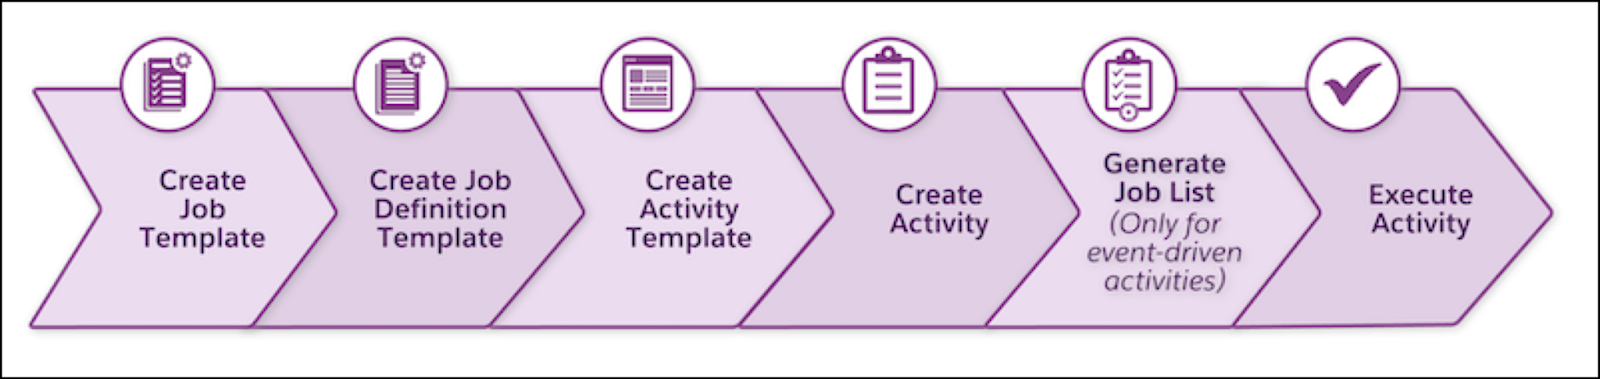  The activity management configuration process from creating a job template to executing an activity.